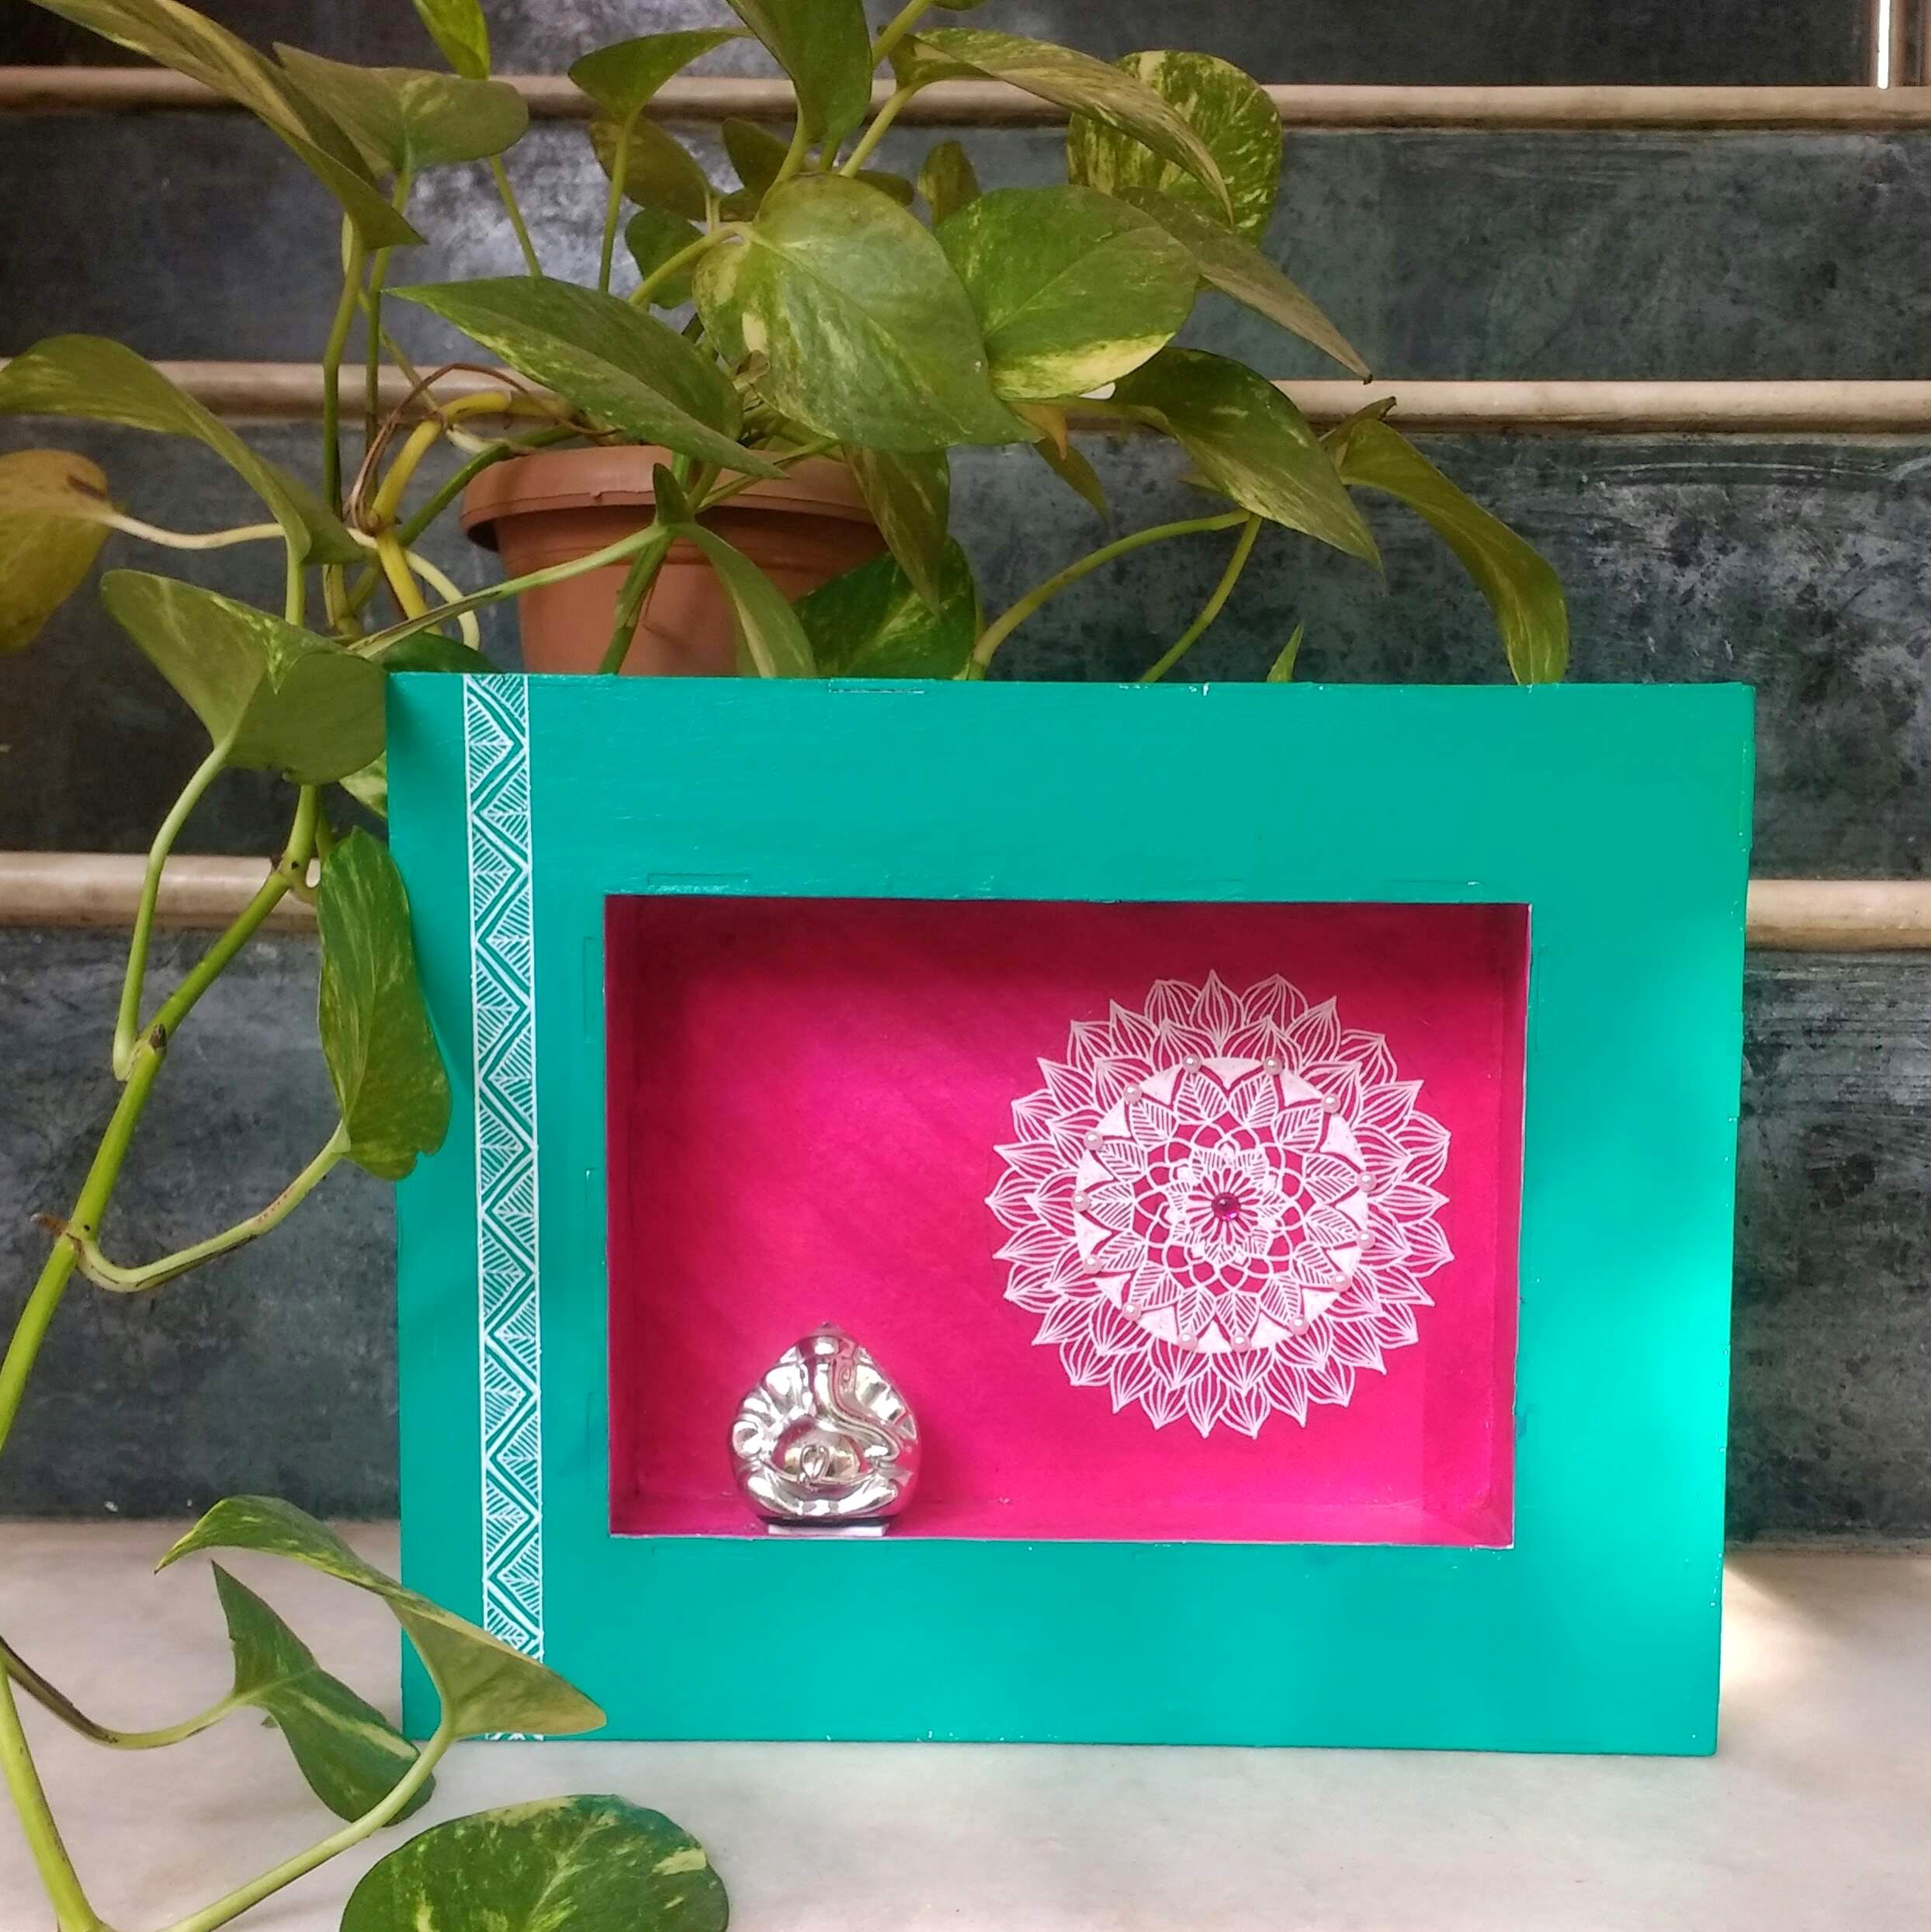 Green,Pink,Picture frame,Magenta,Leaf,Box,Rectangle,Textile,Plant,Visual arts